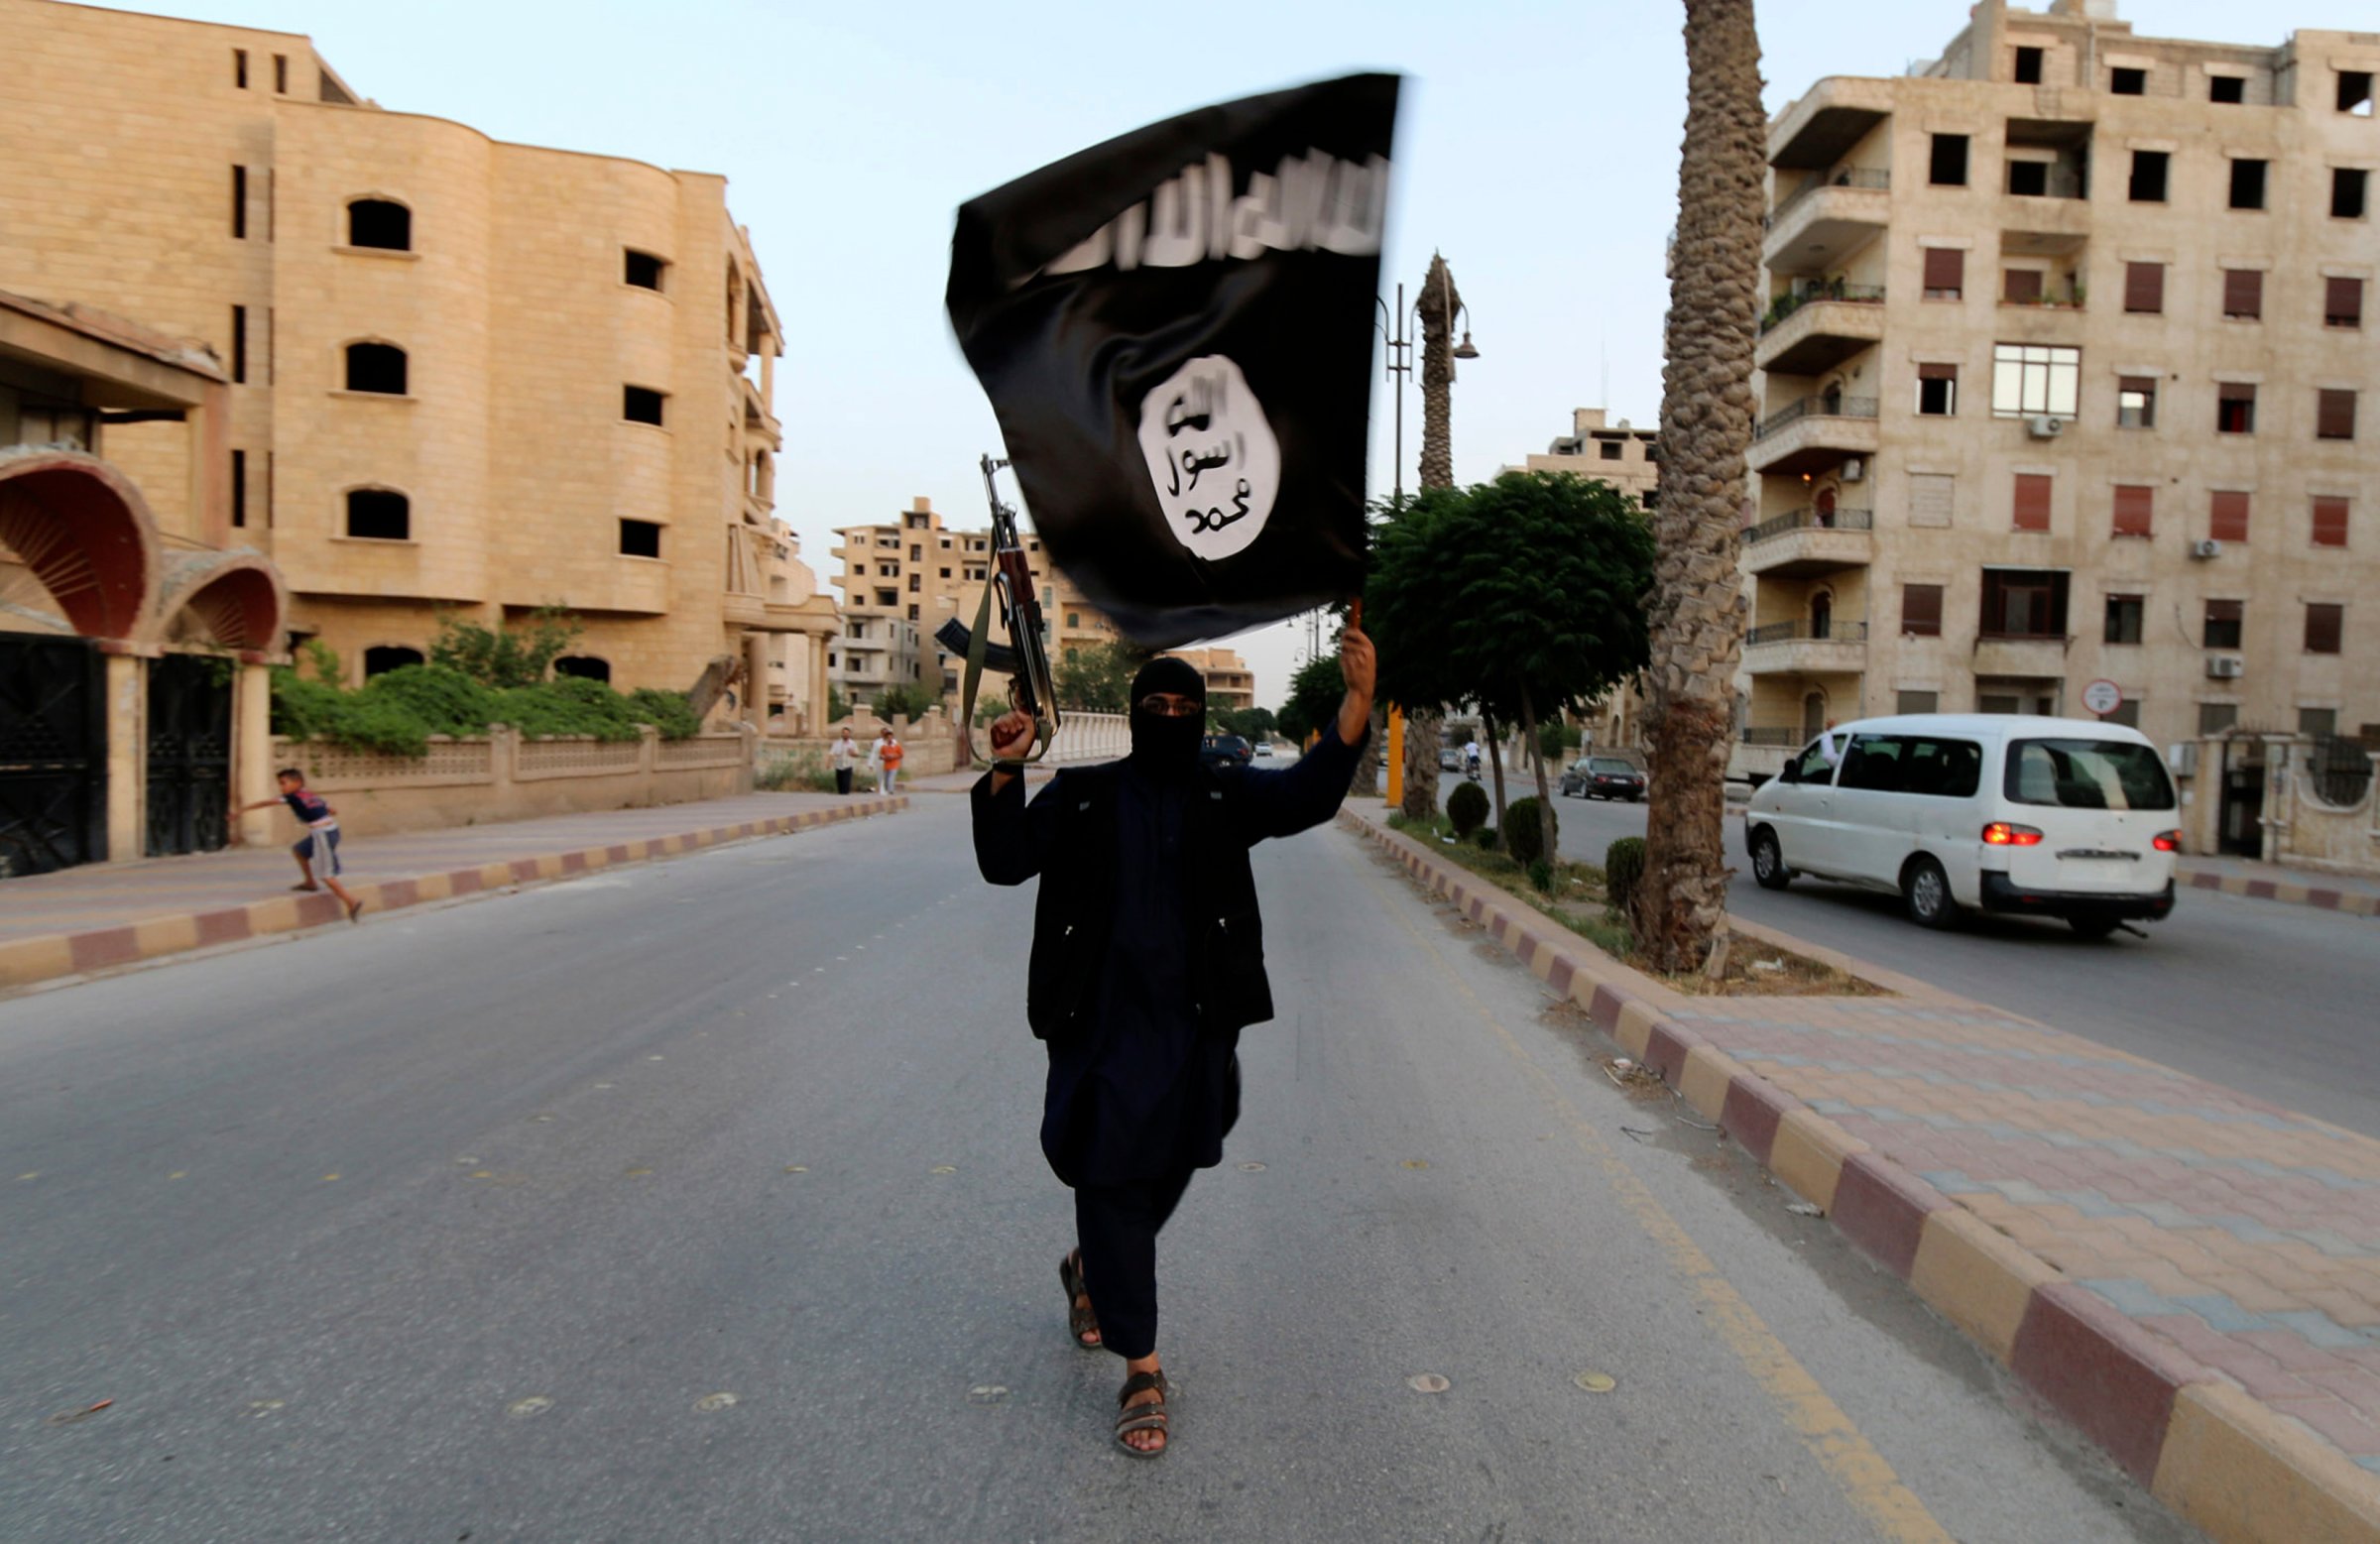 A member loyal to the Islamic State in Iraq and the Syria waves an ISIS flag in Raqqa, Syria on June 29, 2014.